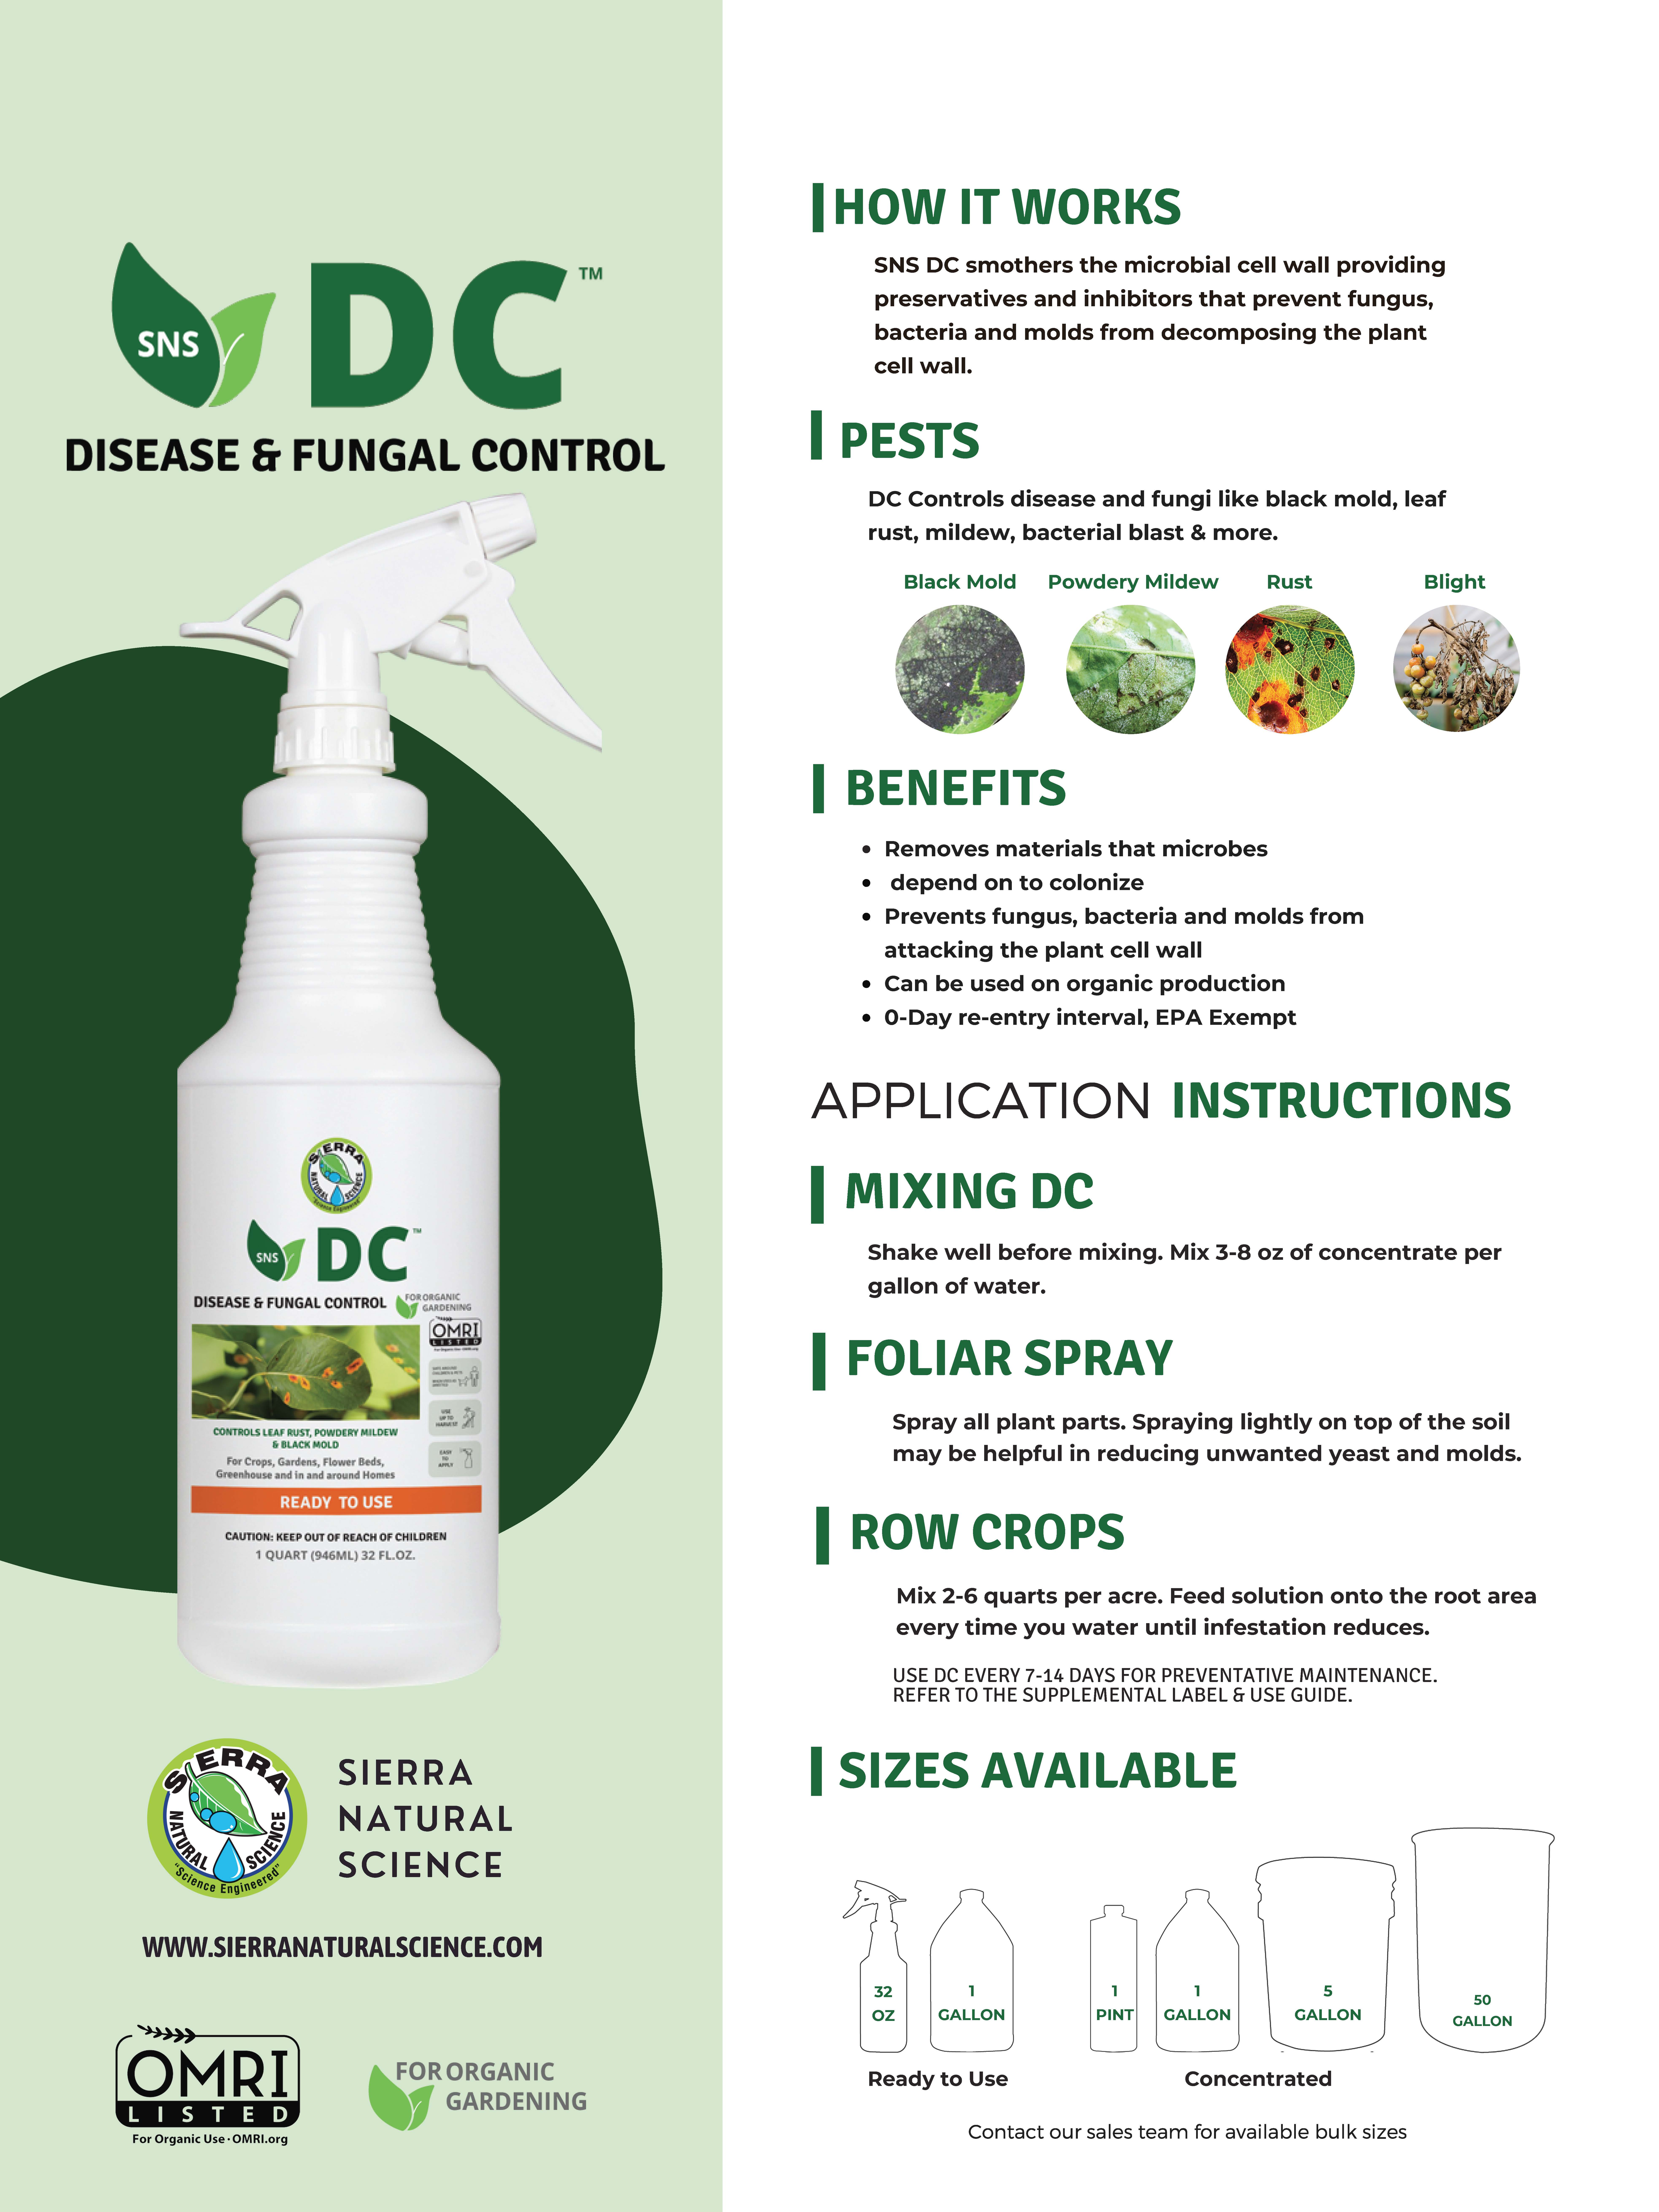 Informative Brochure for SNS DC Disease and Fungal control